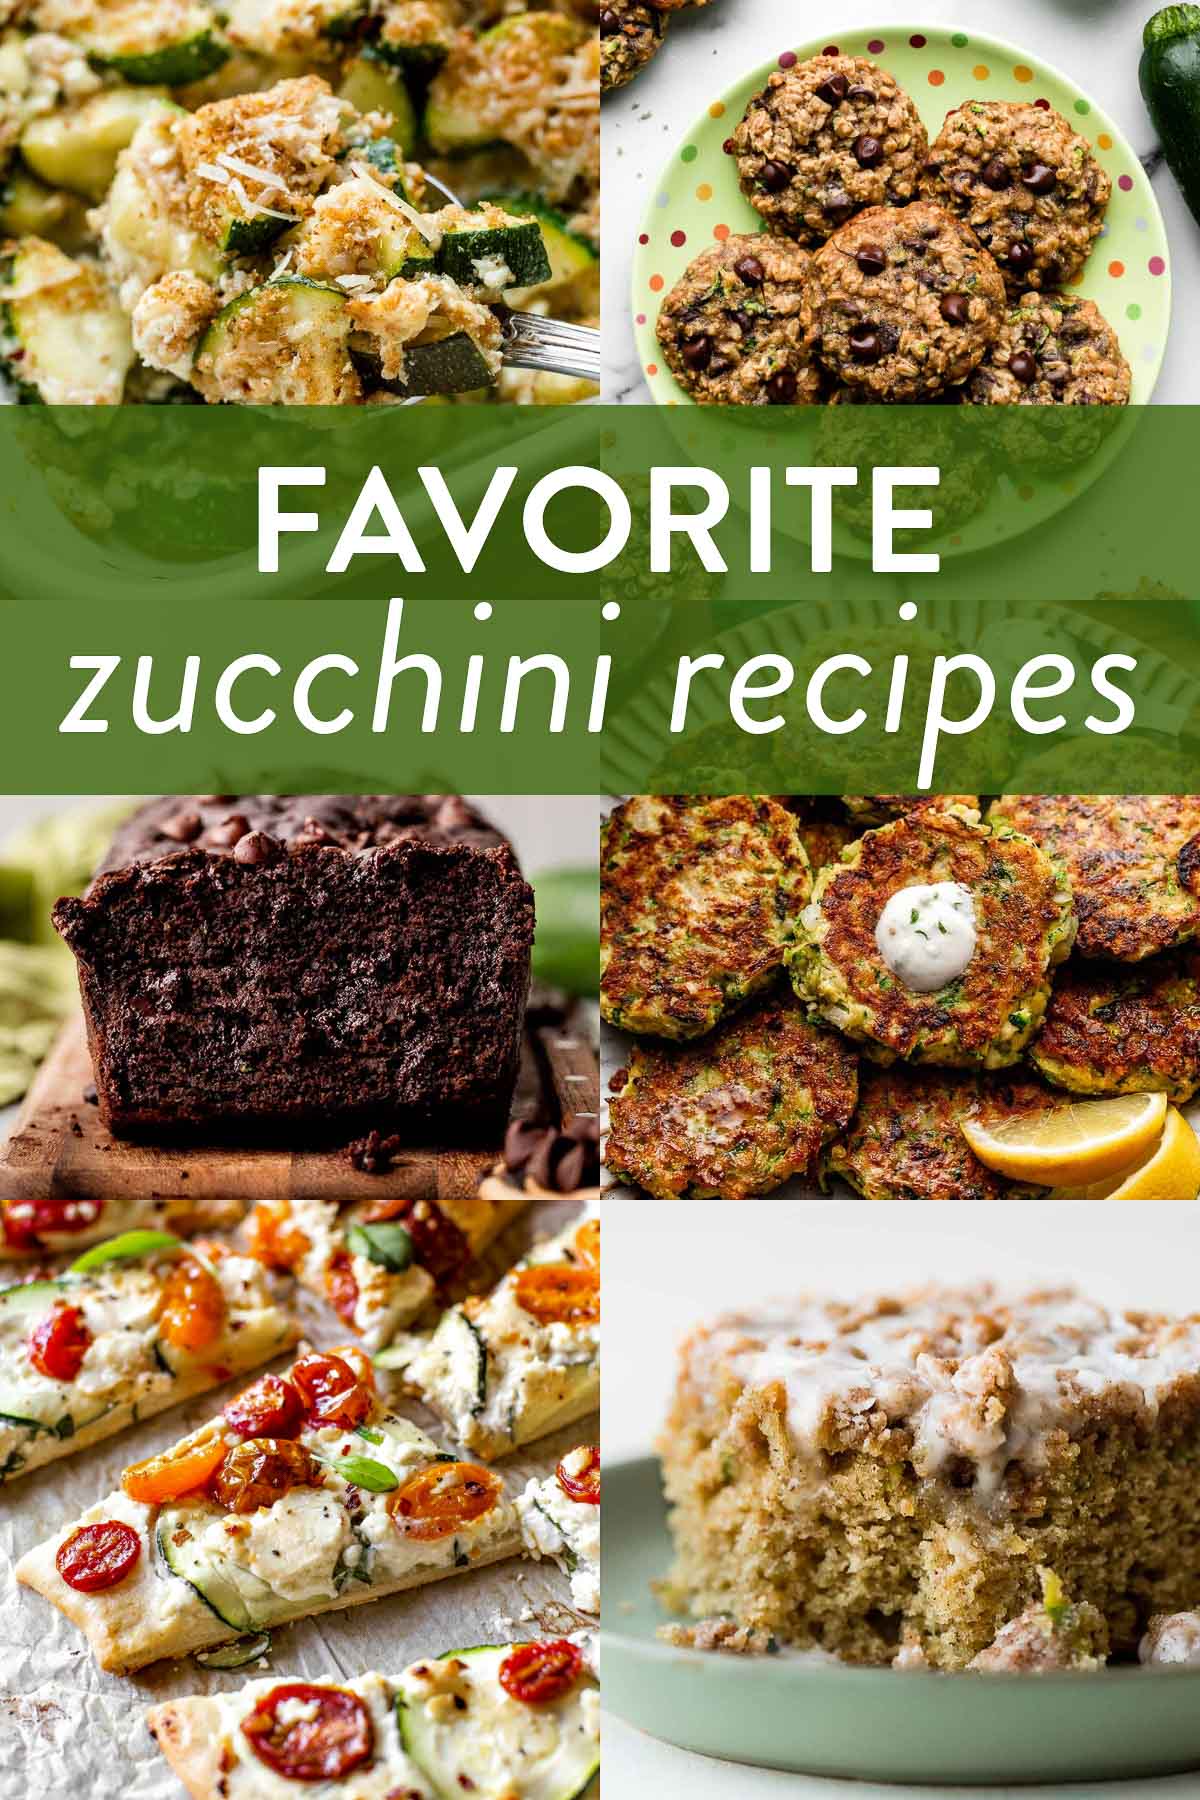 collage of zucchini recipes including zucchini casserole, oatmeal cookies, chocolate zucchini bread, fritters, flatbread with tomatoes, and crumb cake.